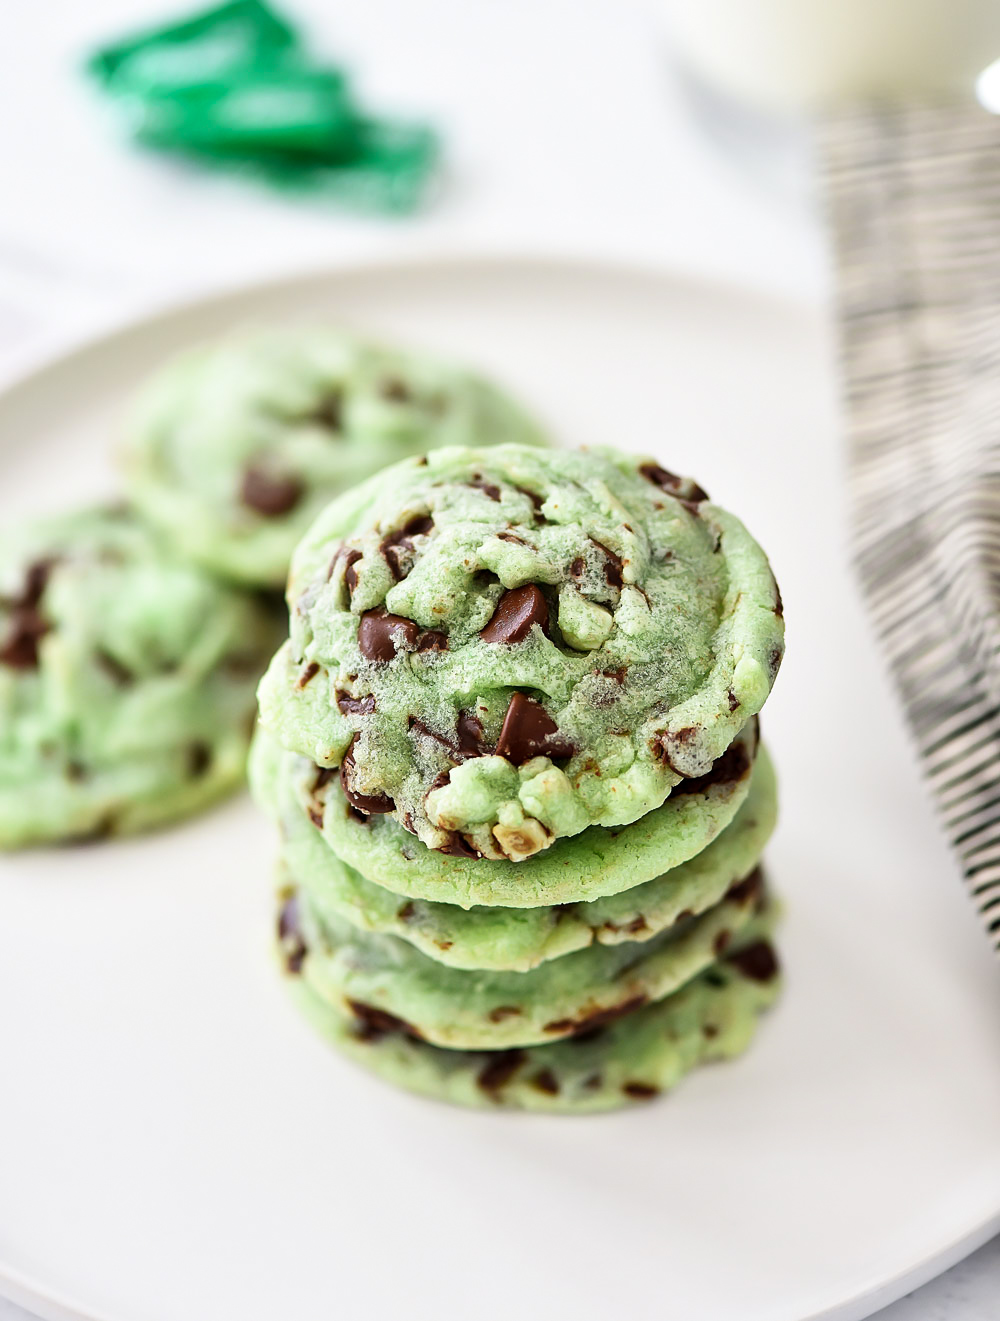 Mint Chocolate Chip Cookies are delicious, soft cookies full of mint flavor and chocolate chips. Life-in-the-Lofthouse.com